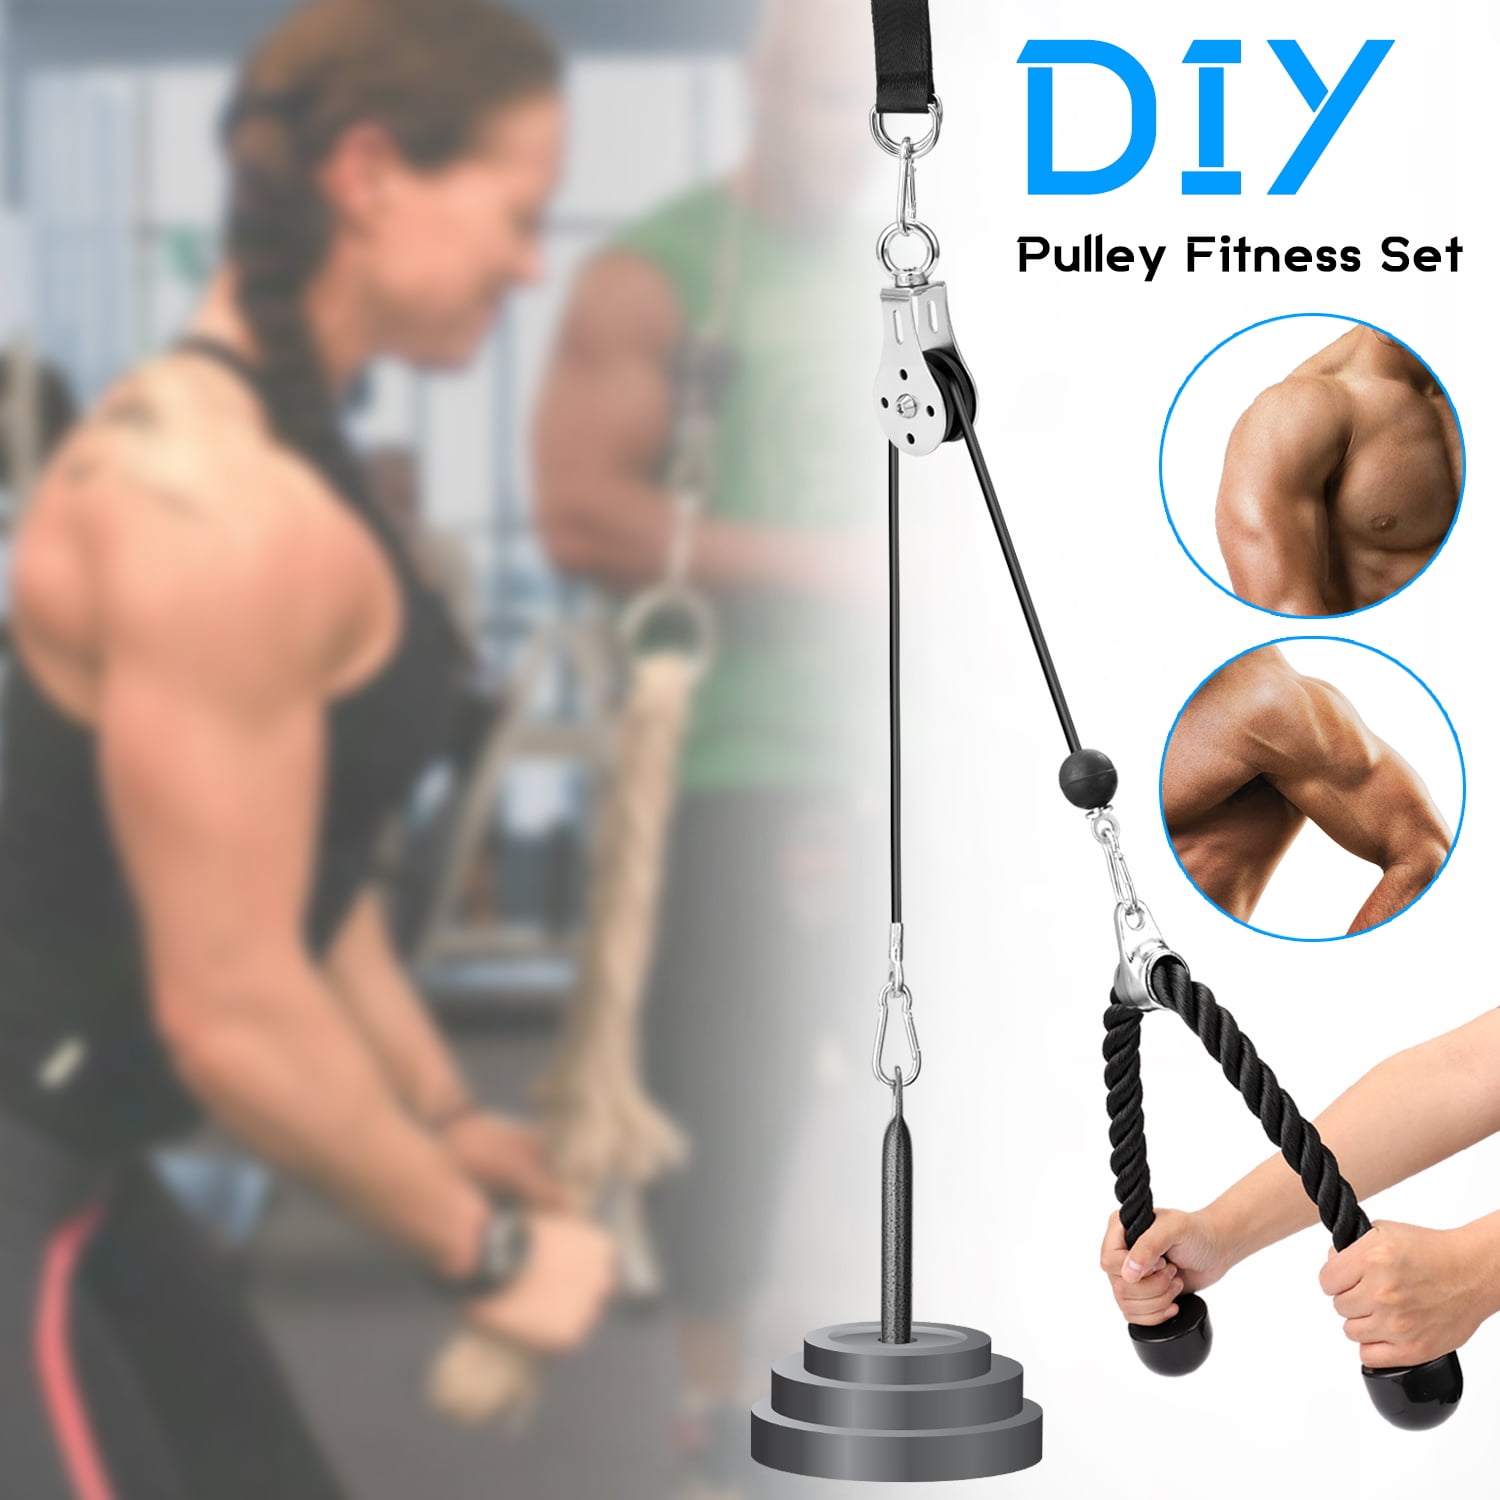 Fitness Workout Equipment 2M Gym Fitness Cable Pulley system with Loading Pin Tricep Strap Straight Bar Forearm Wrist Roller Trainer for LAT Pulldowns Pulley Cable Machine System Bicep Curls